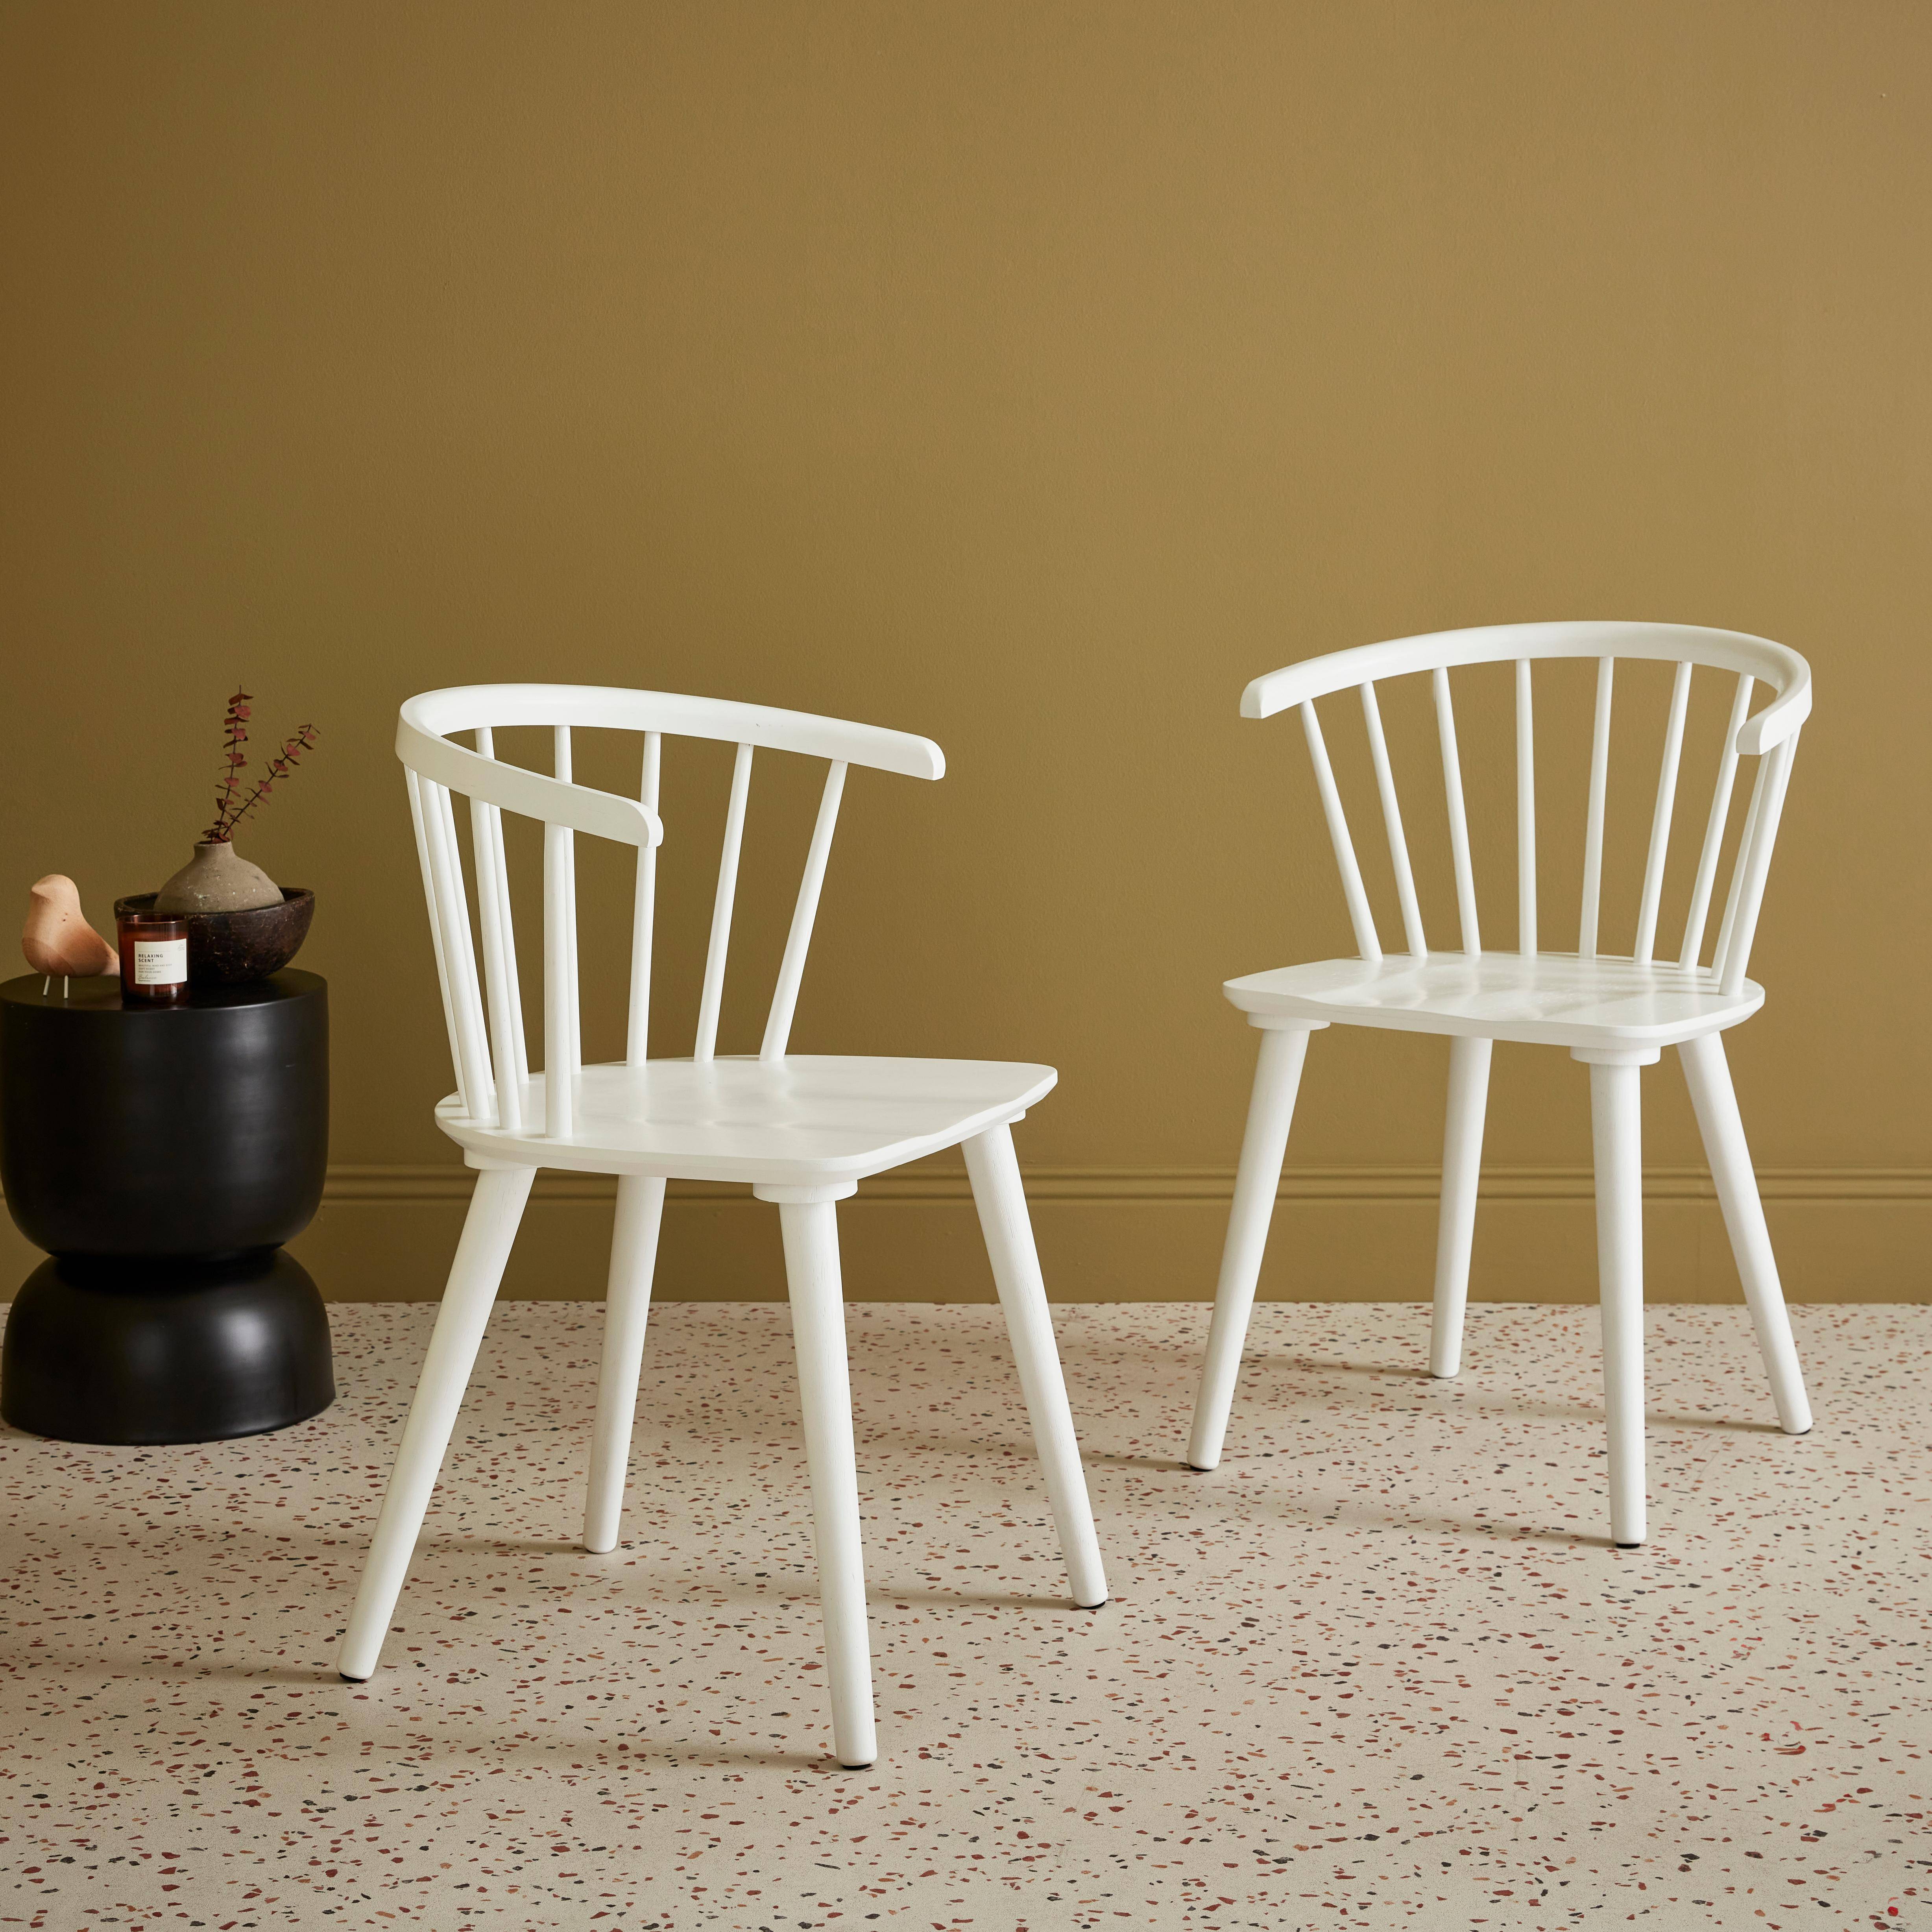 Pair of Wood and Plywood Spindle Chairs, white, L53 x W47.5 x H76cm,sweeek,Photo1